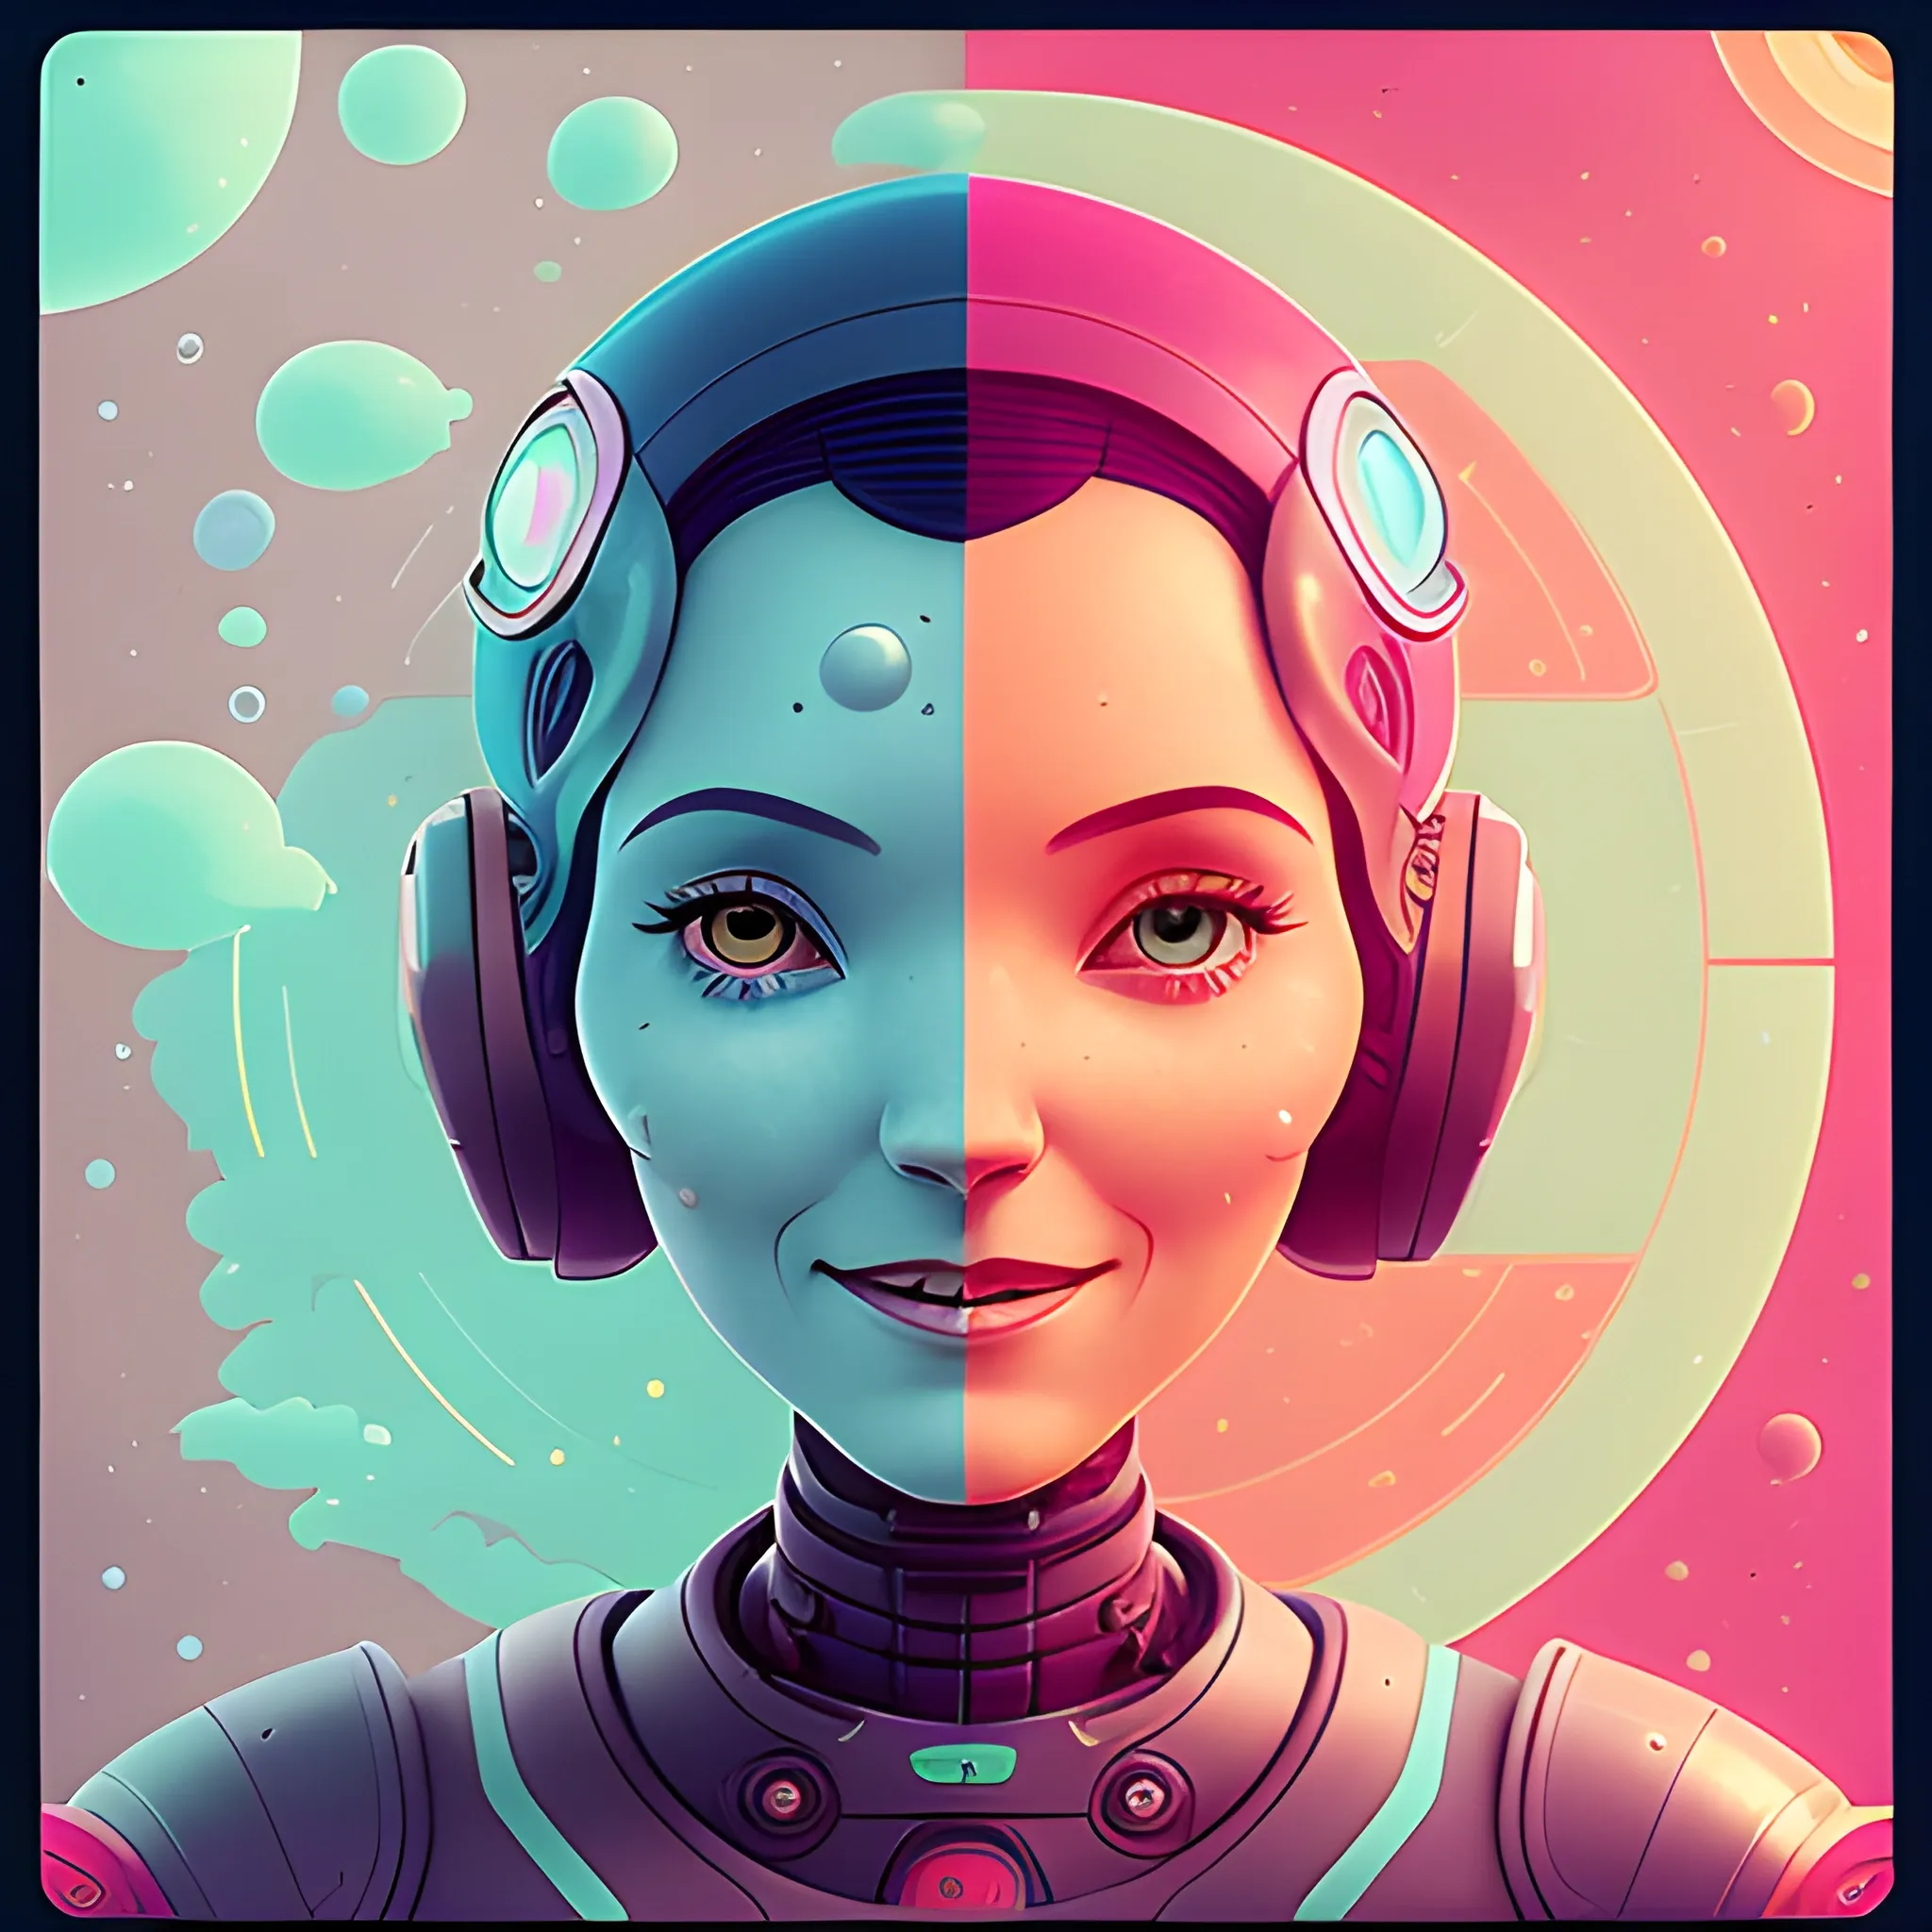 Friendly female robot avatar with government or institutional vibes. Should be cheerful, knowledgeable, and smiling. by petros afshar, ross tran, Tom Bagshaw, tom whalen, underwater bubbly psychedelic clouds, Anaglyph 3D lens blur effect
